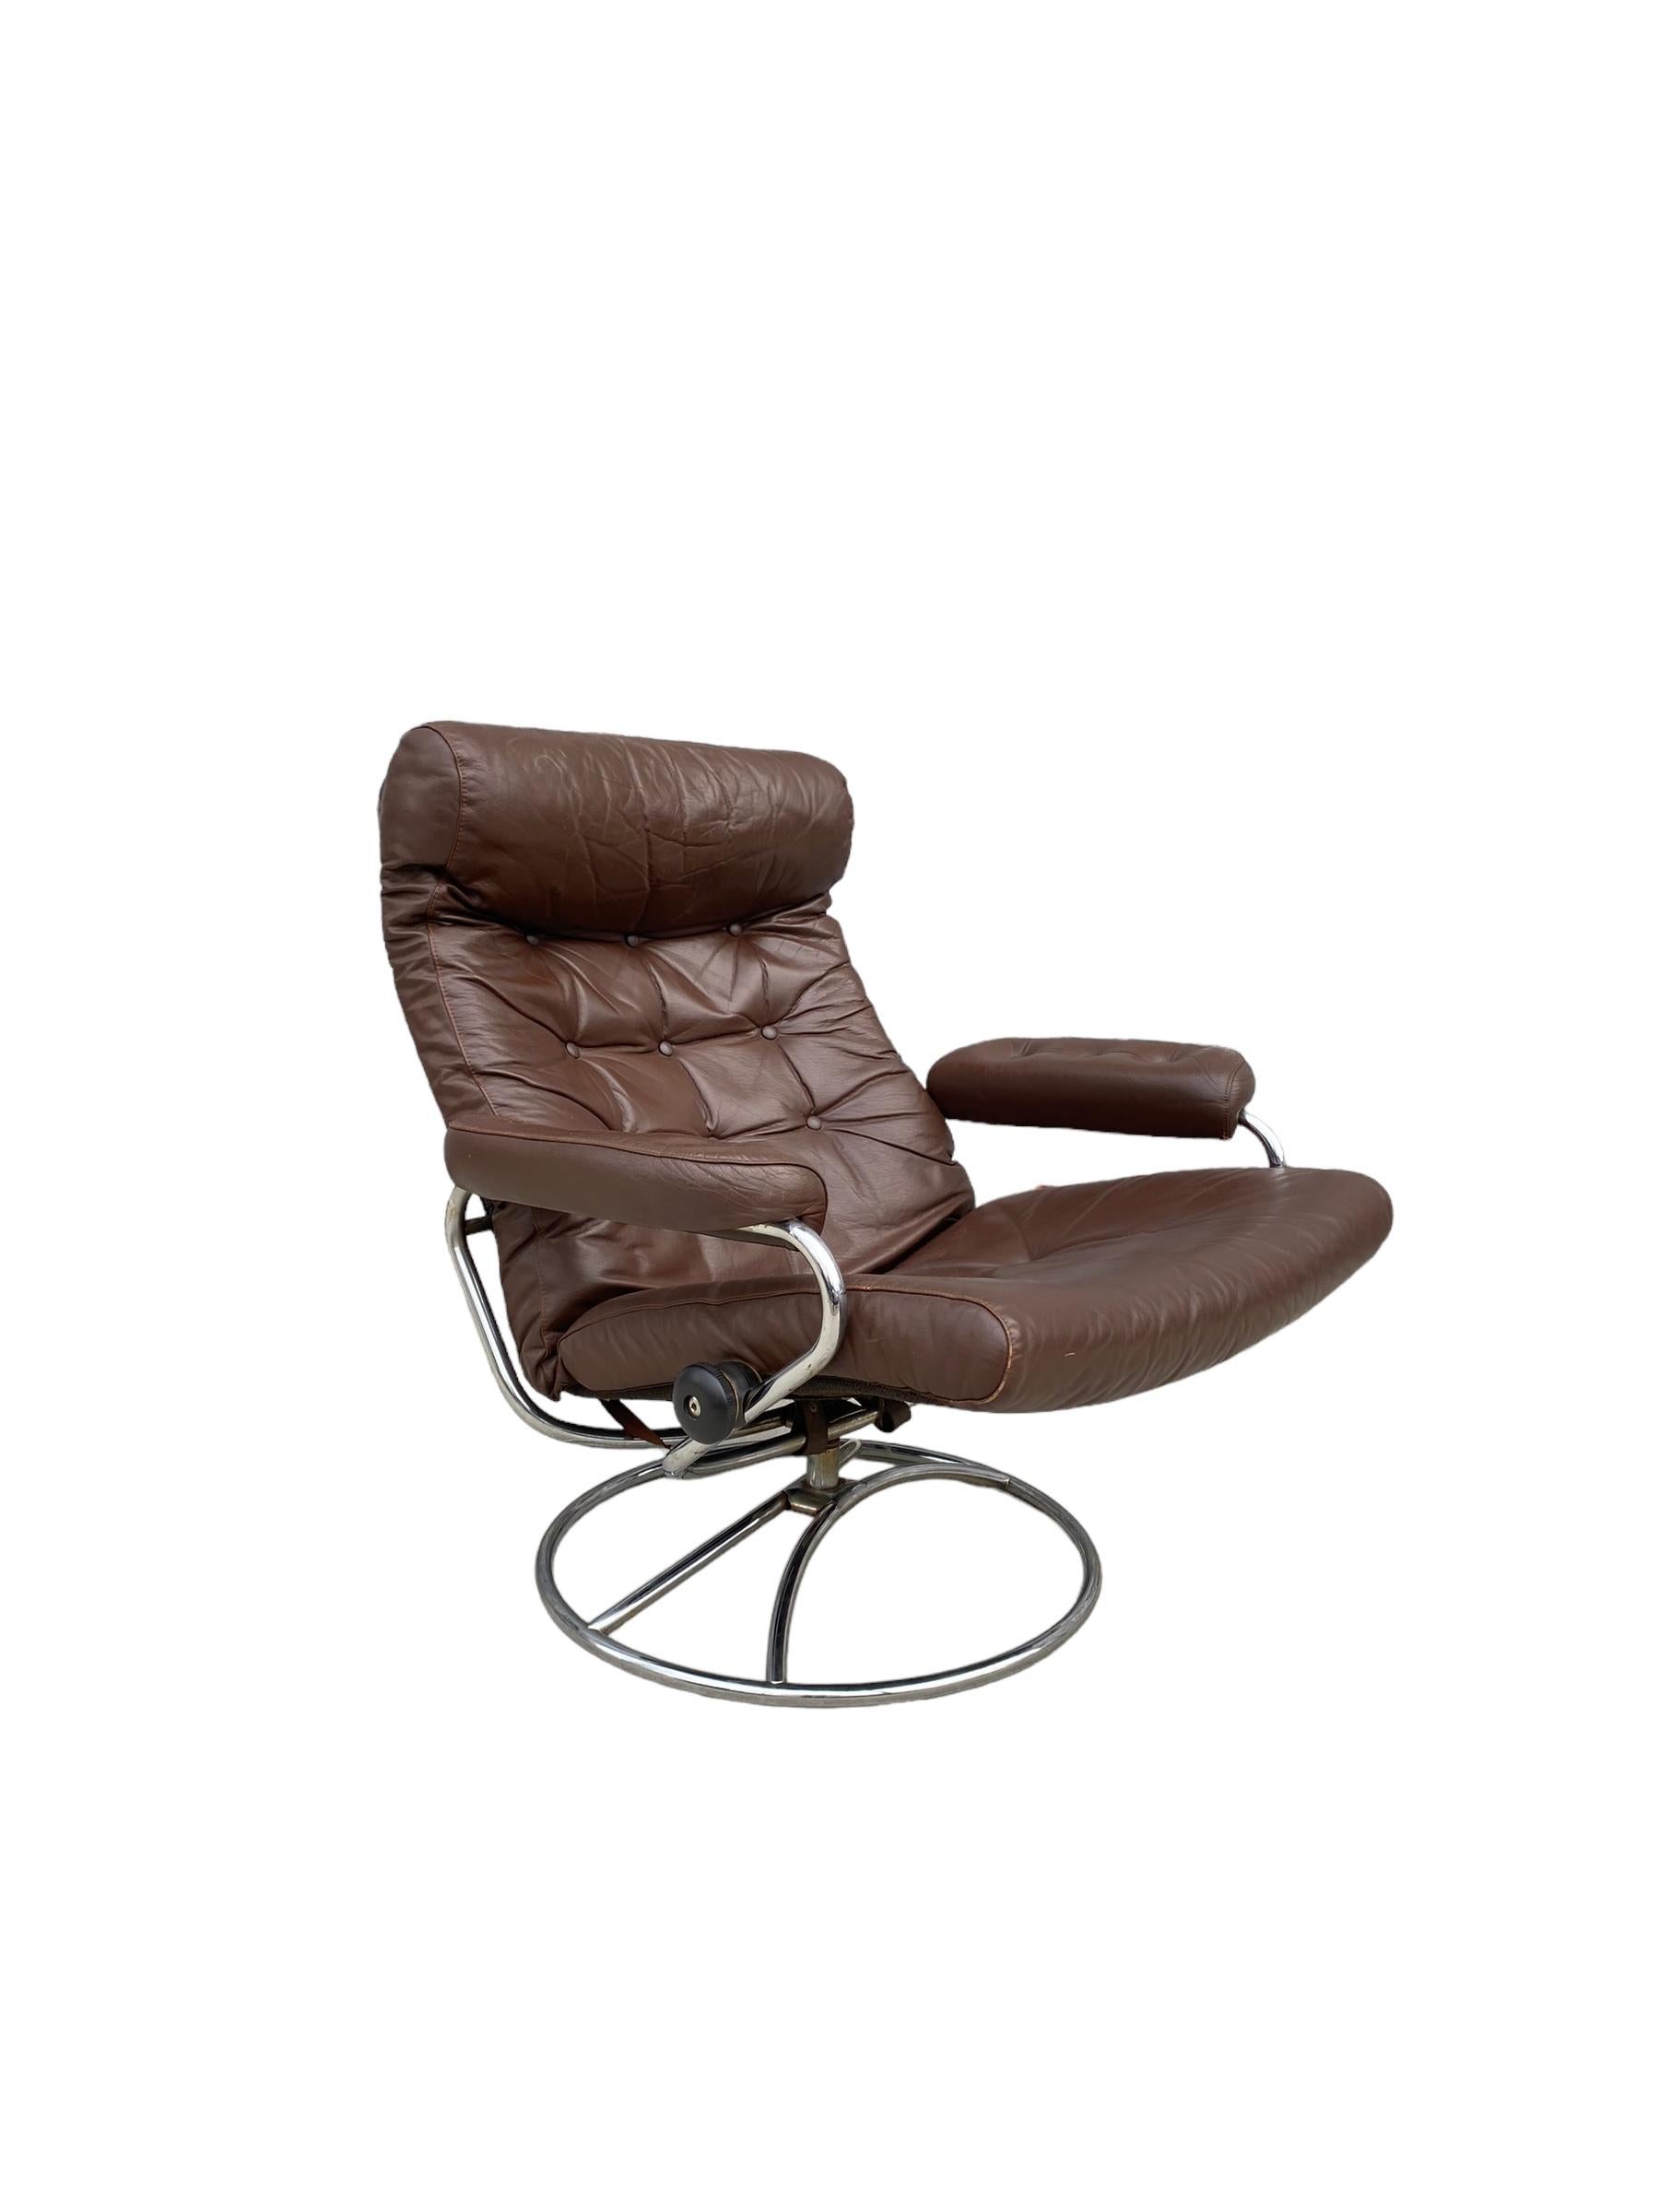 Ekornes Stressless Reclining Lounge Chair and Ottoman For Sale 1